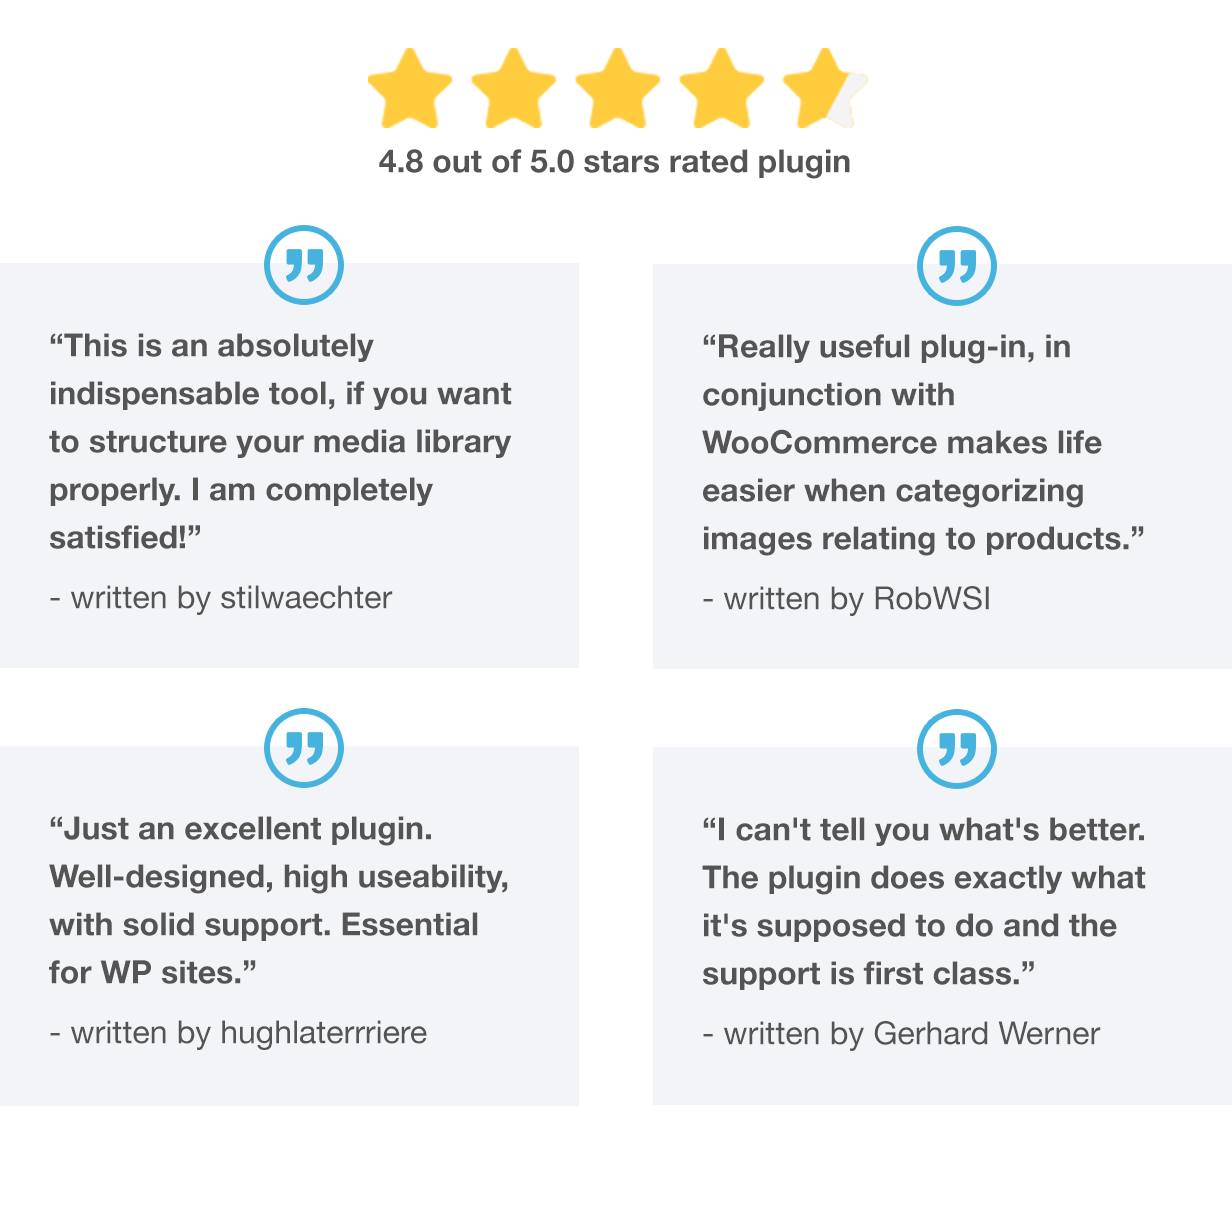 Top rated WordPress plugin: 4.8 out of 5.0 stars rated plugin. What customer says: “This is an absolutely indispensable tool, if you want to structure your media library properly. I am completely satisfied!” written by stilwaechter; “Really useful plug-in, in conjunction with WooCommerce makes life easier when categorizing images relating to products.” written by RobWSI; “Just an excellent plugin. Well-designed, high useability, with solid support. Essential for WP sites.” written by hughlaterrriere; “I can't tell you what's better. The plugin does exactly what it's supposed to do and the support is first class.” written by Gerhard Werner